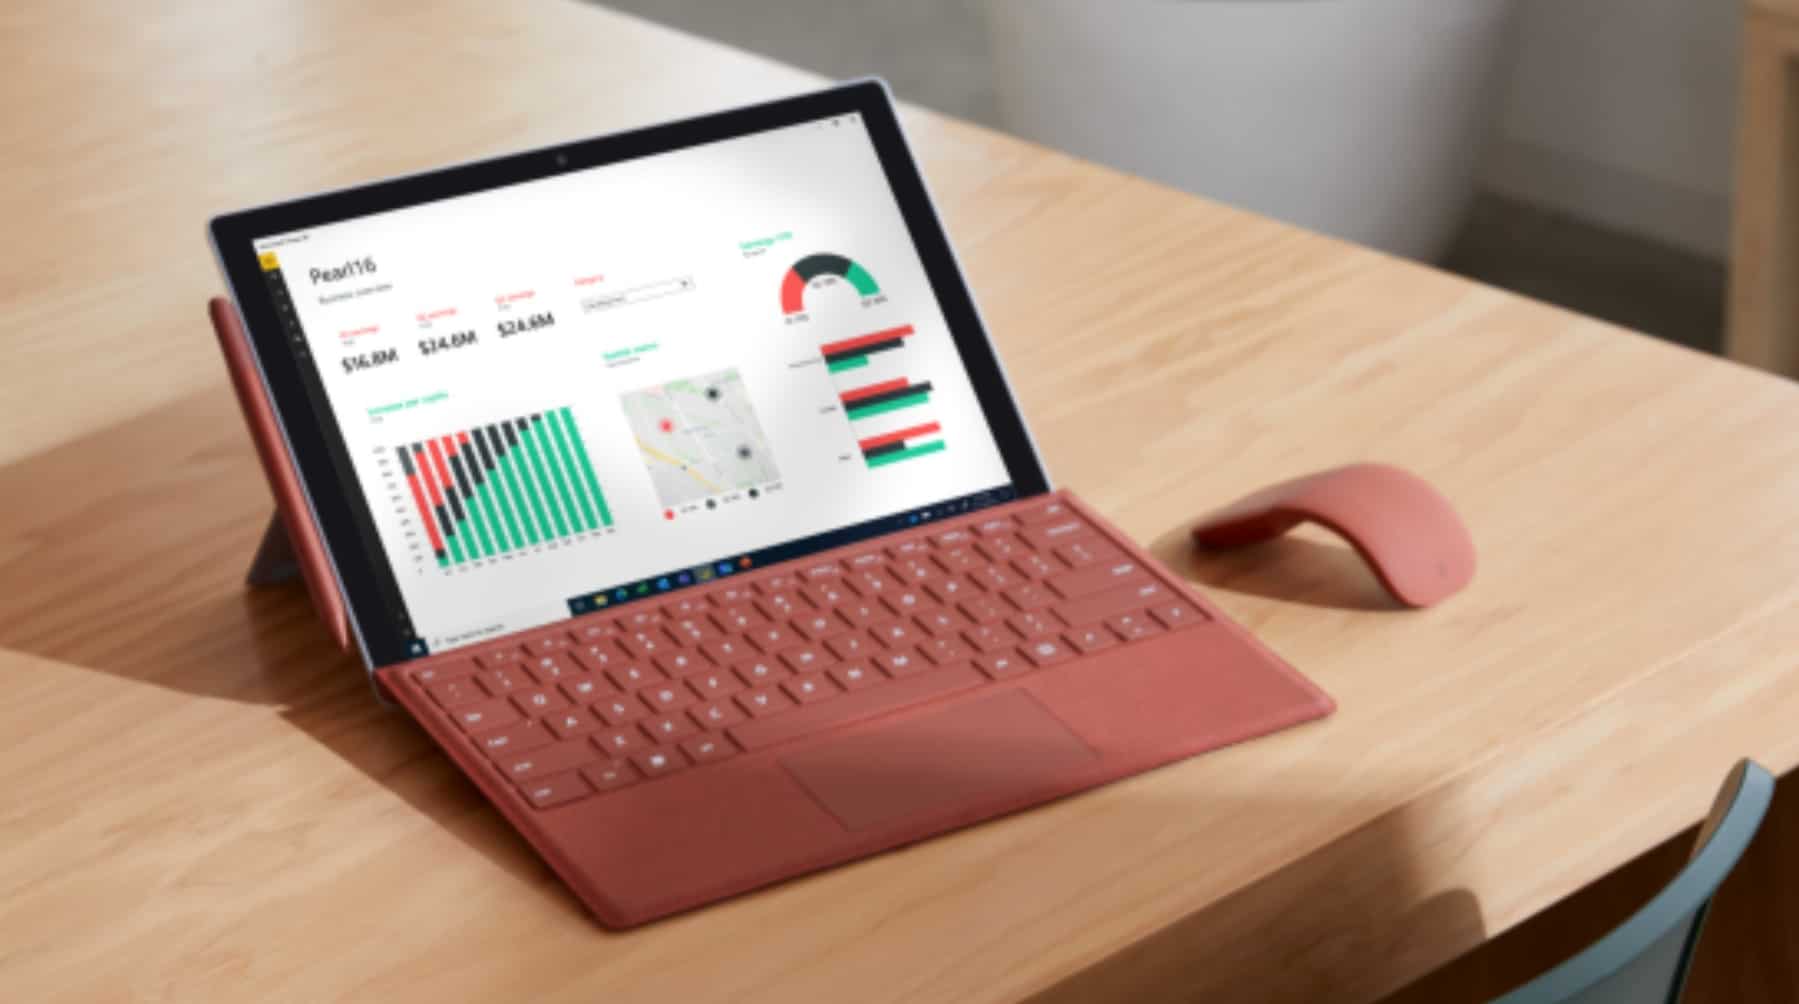 Microsoft Surface Pro 7+ With 11th-Gen Intel Core SoC Launched in India: Price Starts at ₹83,999